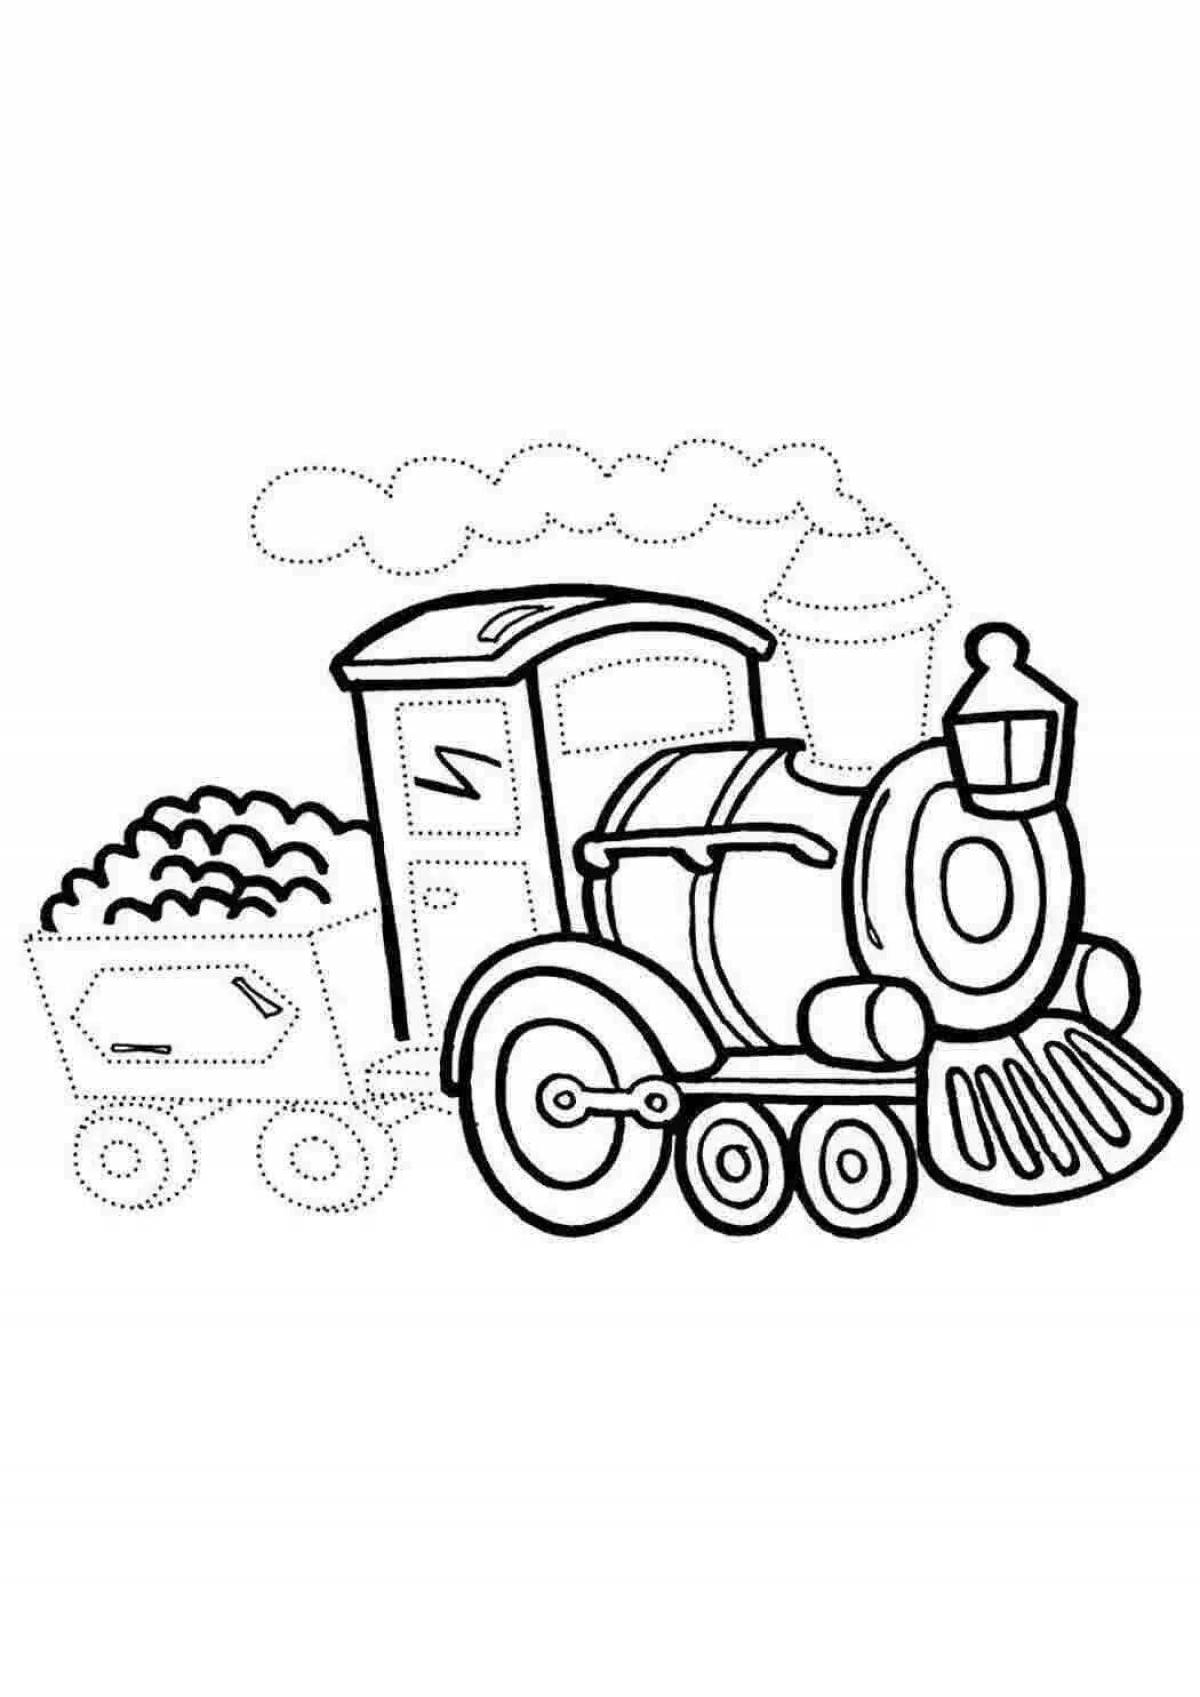 Coloring page adorable train for kids